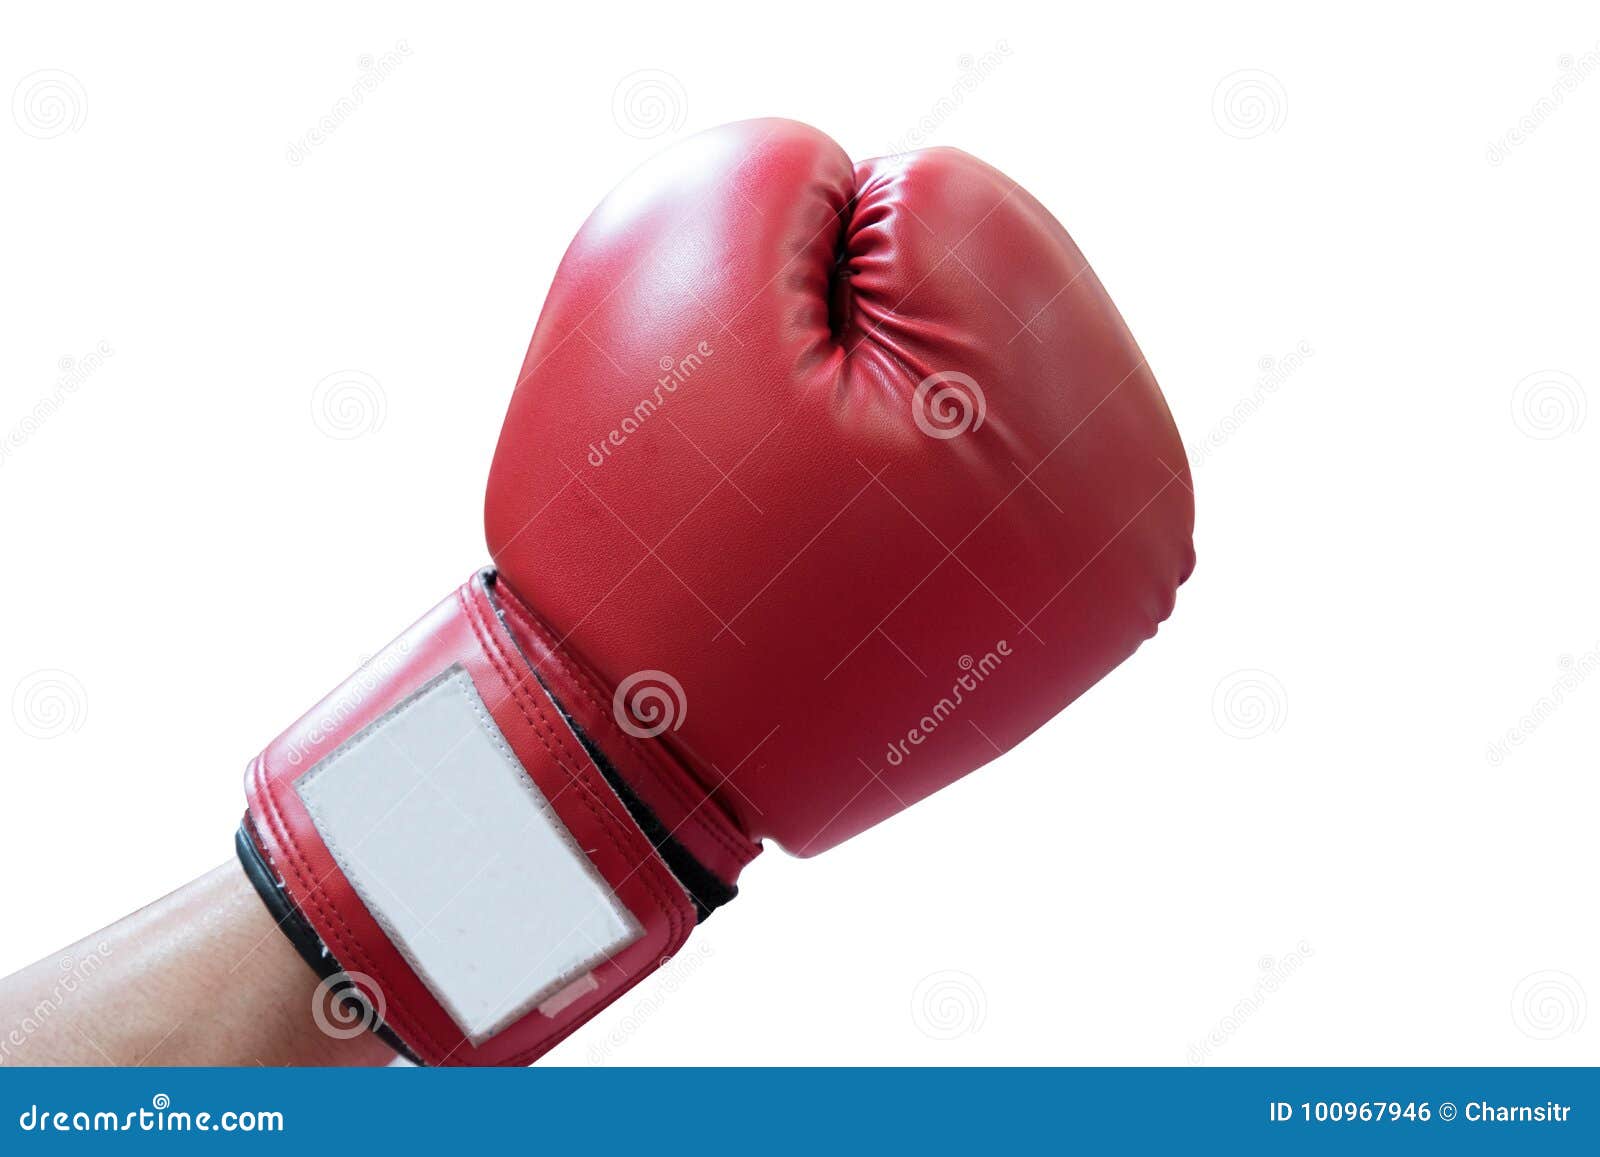 Fist with Boxing Glove on White Background Stock Photo - Image of